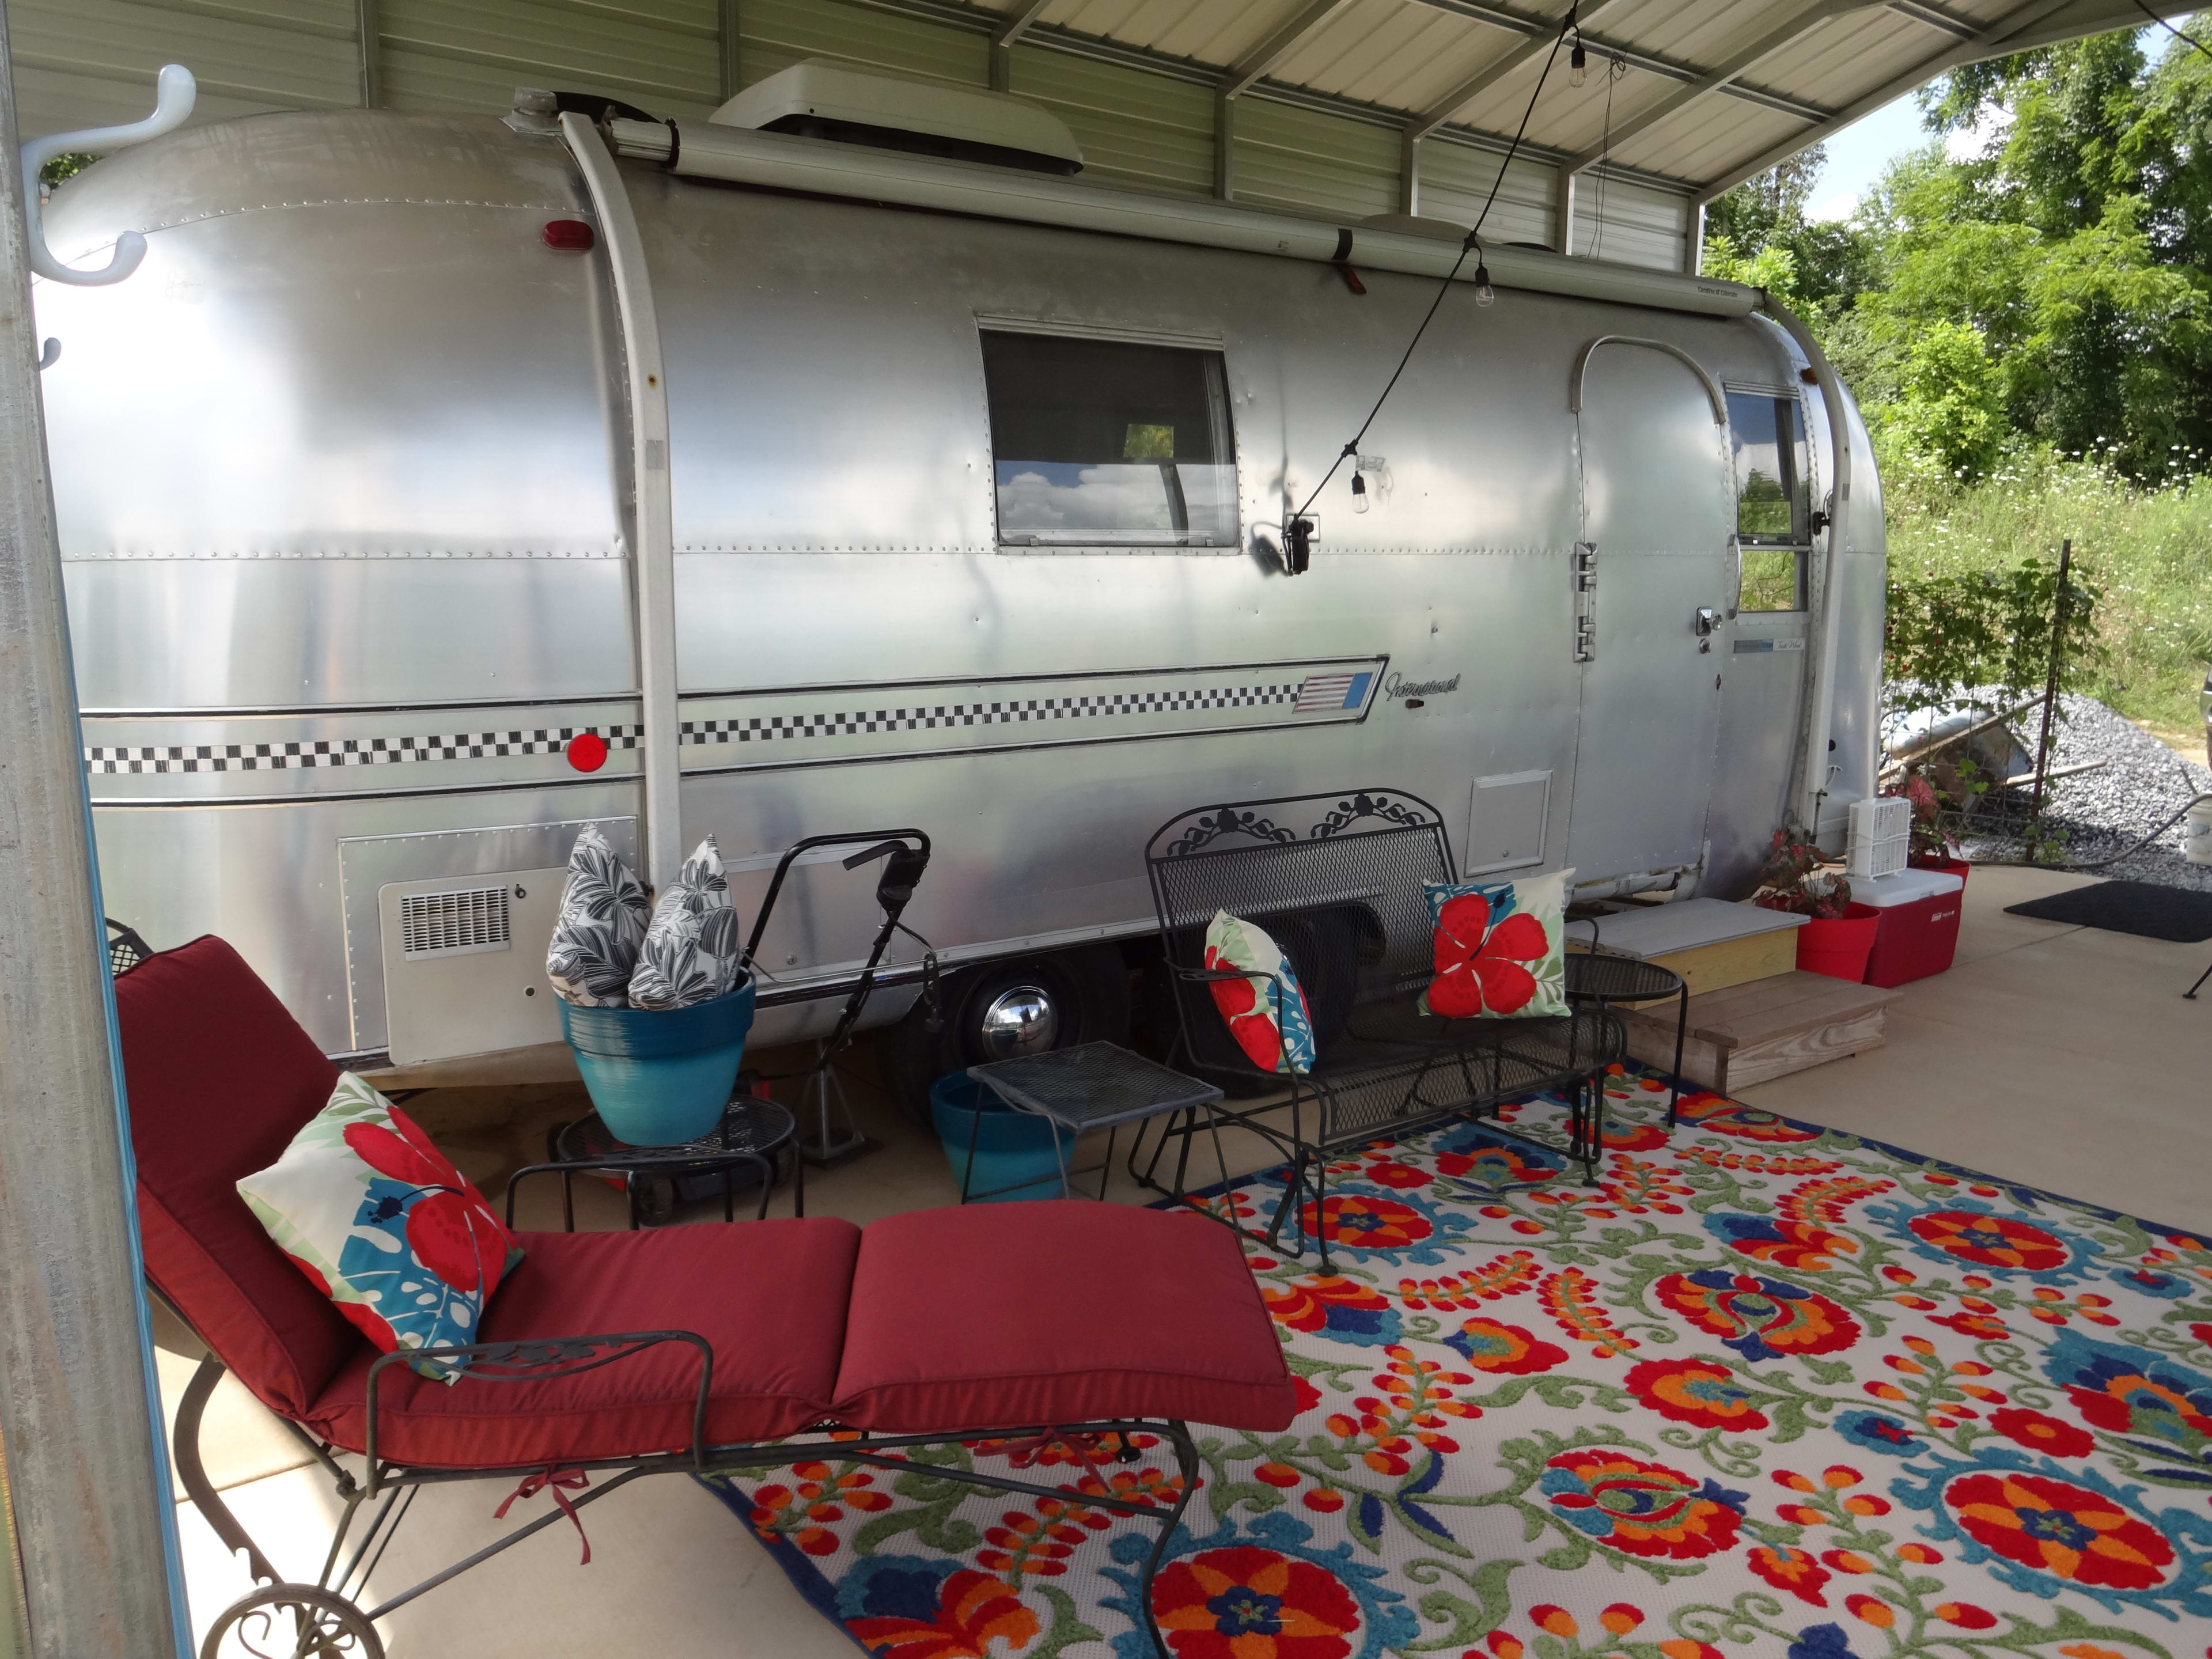 1967 Airstream Trade Wind has been lovingly restored over two years.